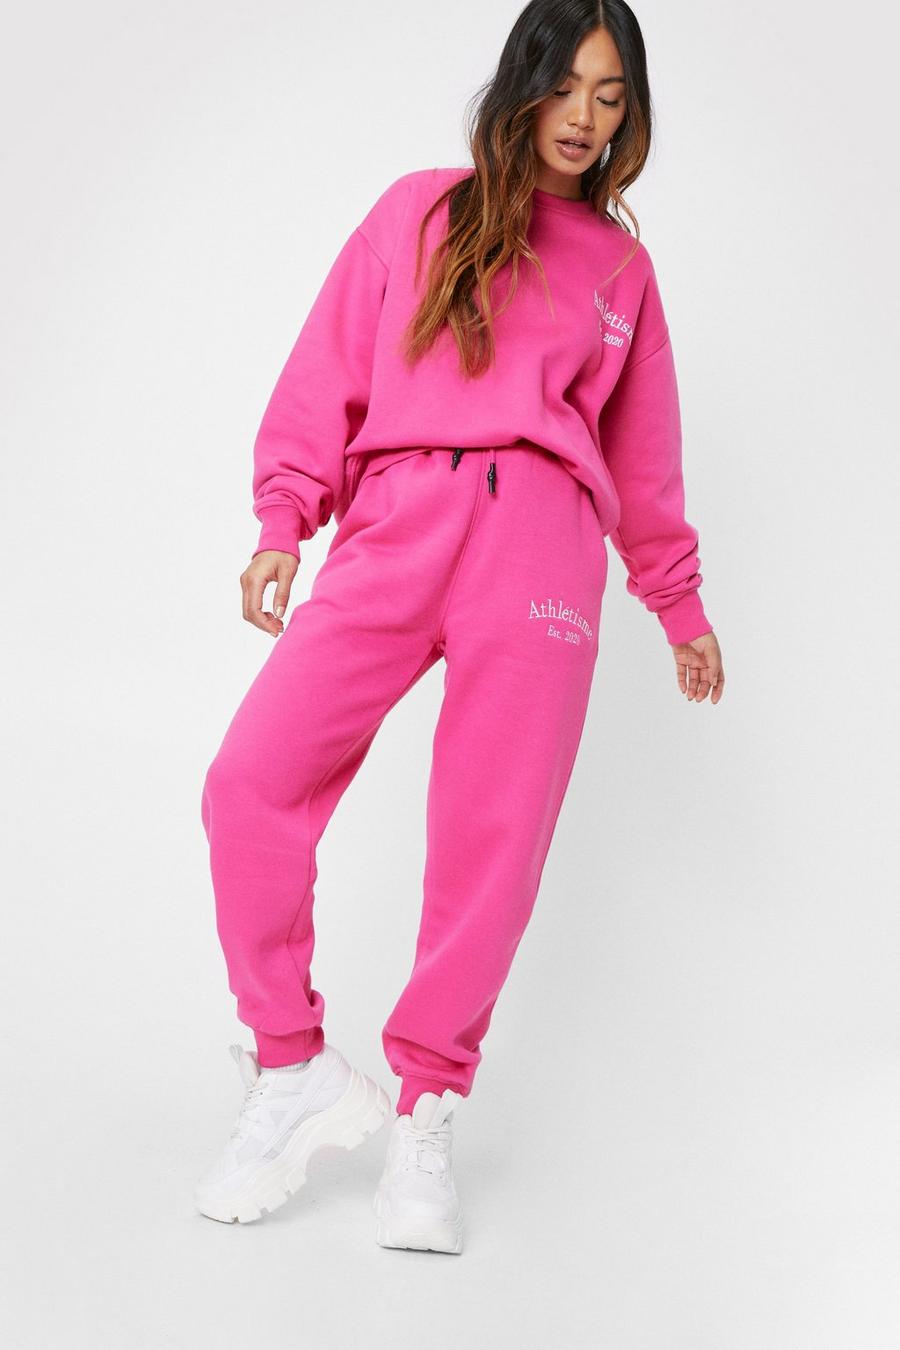 Hot pink Petite Athletisme Embroidered Joggers